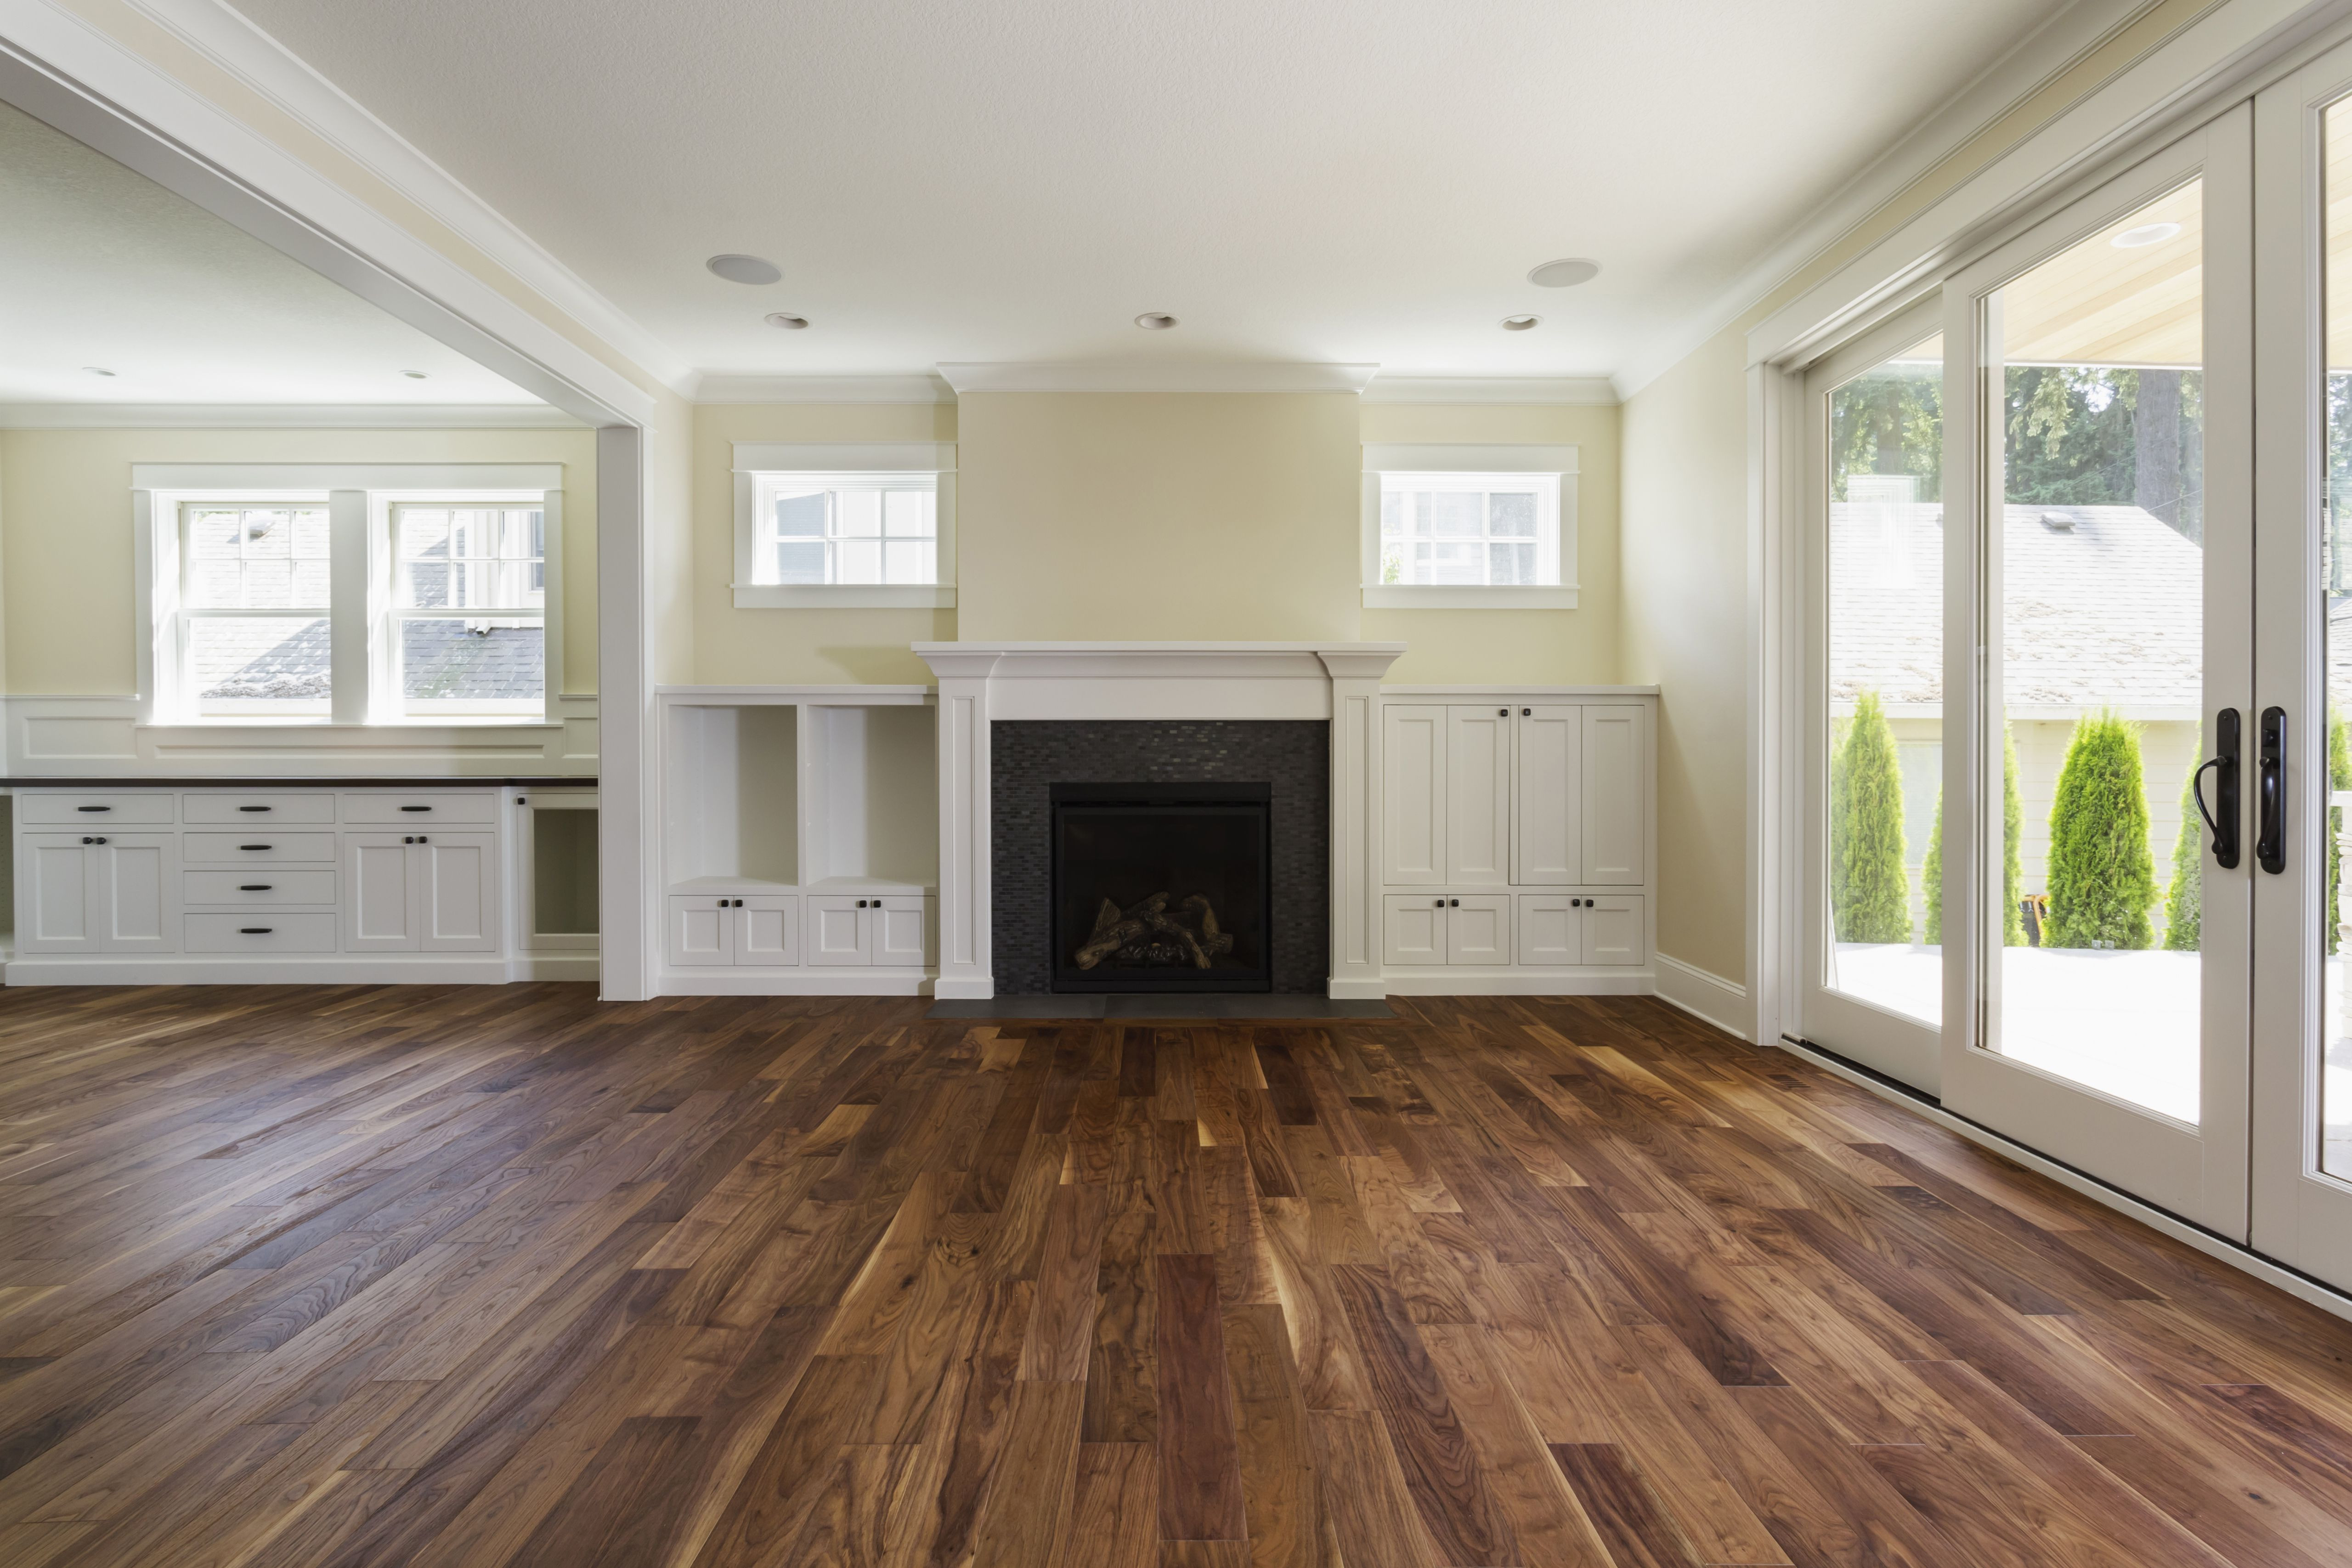 13 Stylish Hand Scraped Hardwood Flooring Sale 2024 free download hand scraped hardwood flooring sale of the pros and cons of prefinished hardwood flooring with regard to fireplace and built in shelves in living room 482143011 57bef8e33df78cc16e035397